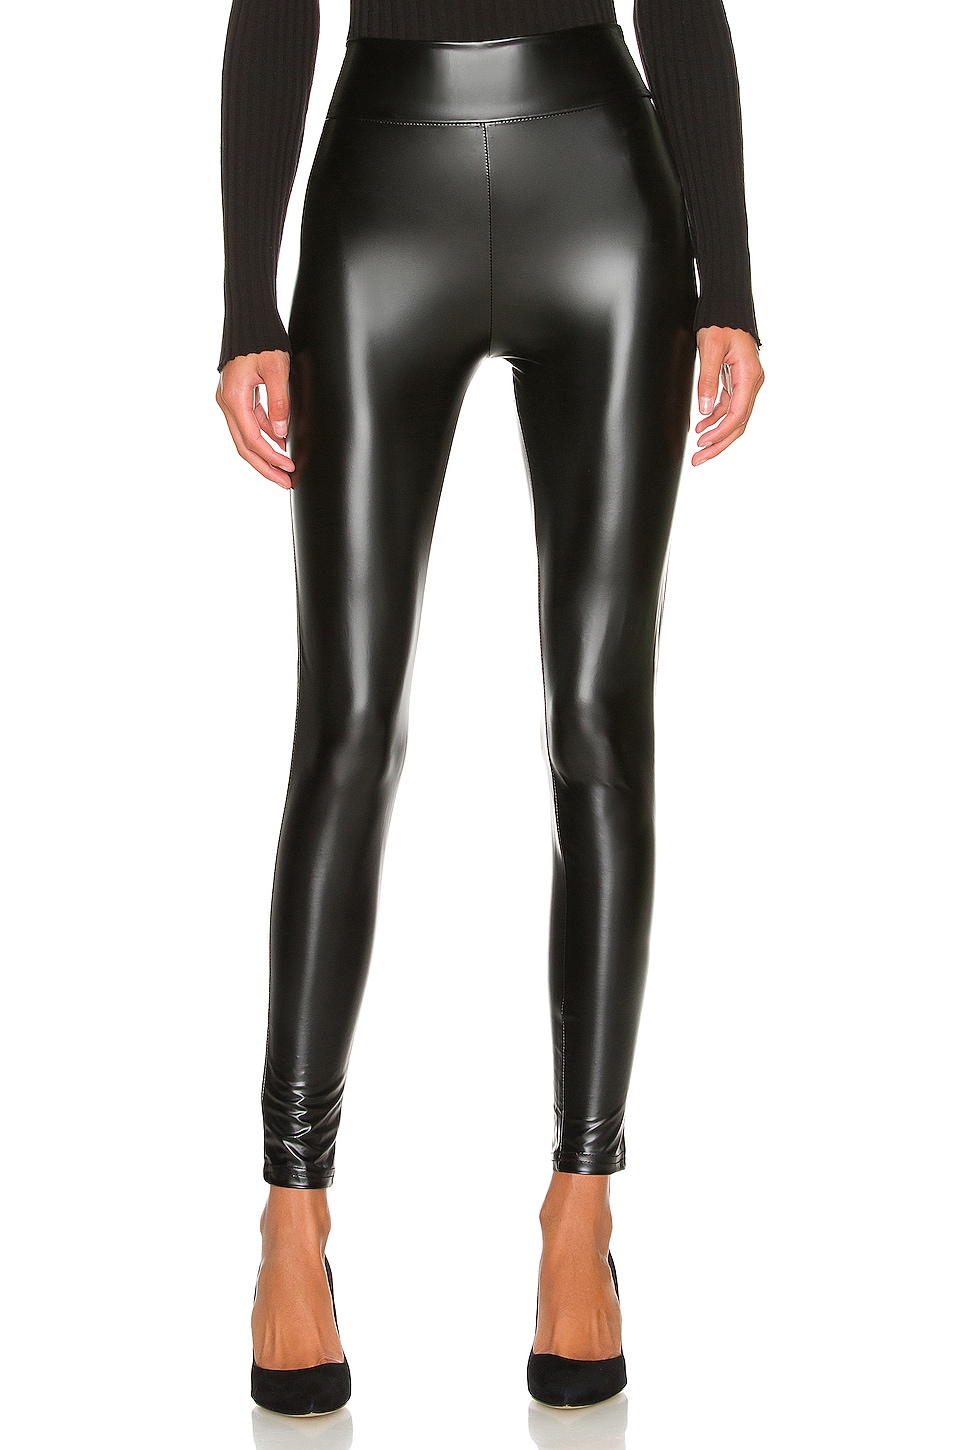 15 pairs of leather leggings and pants to add to your winter wardrobe -  Good Morning America